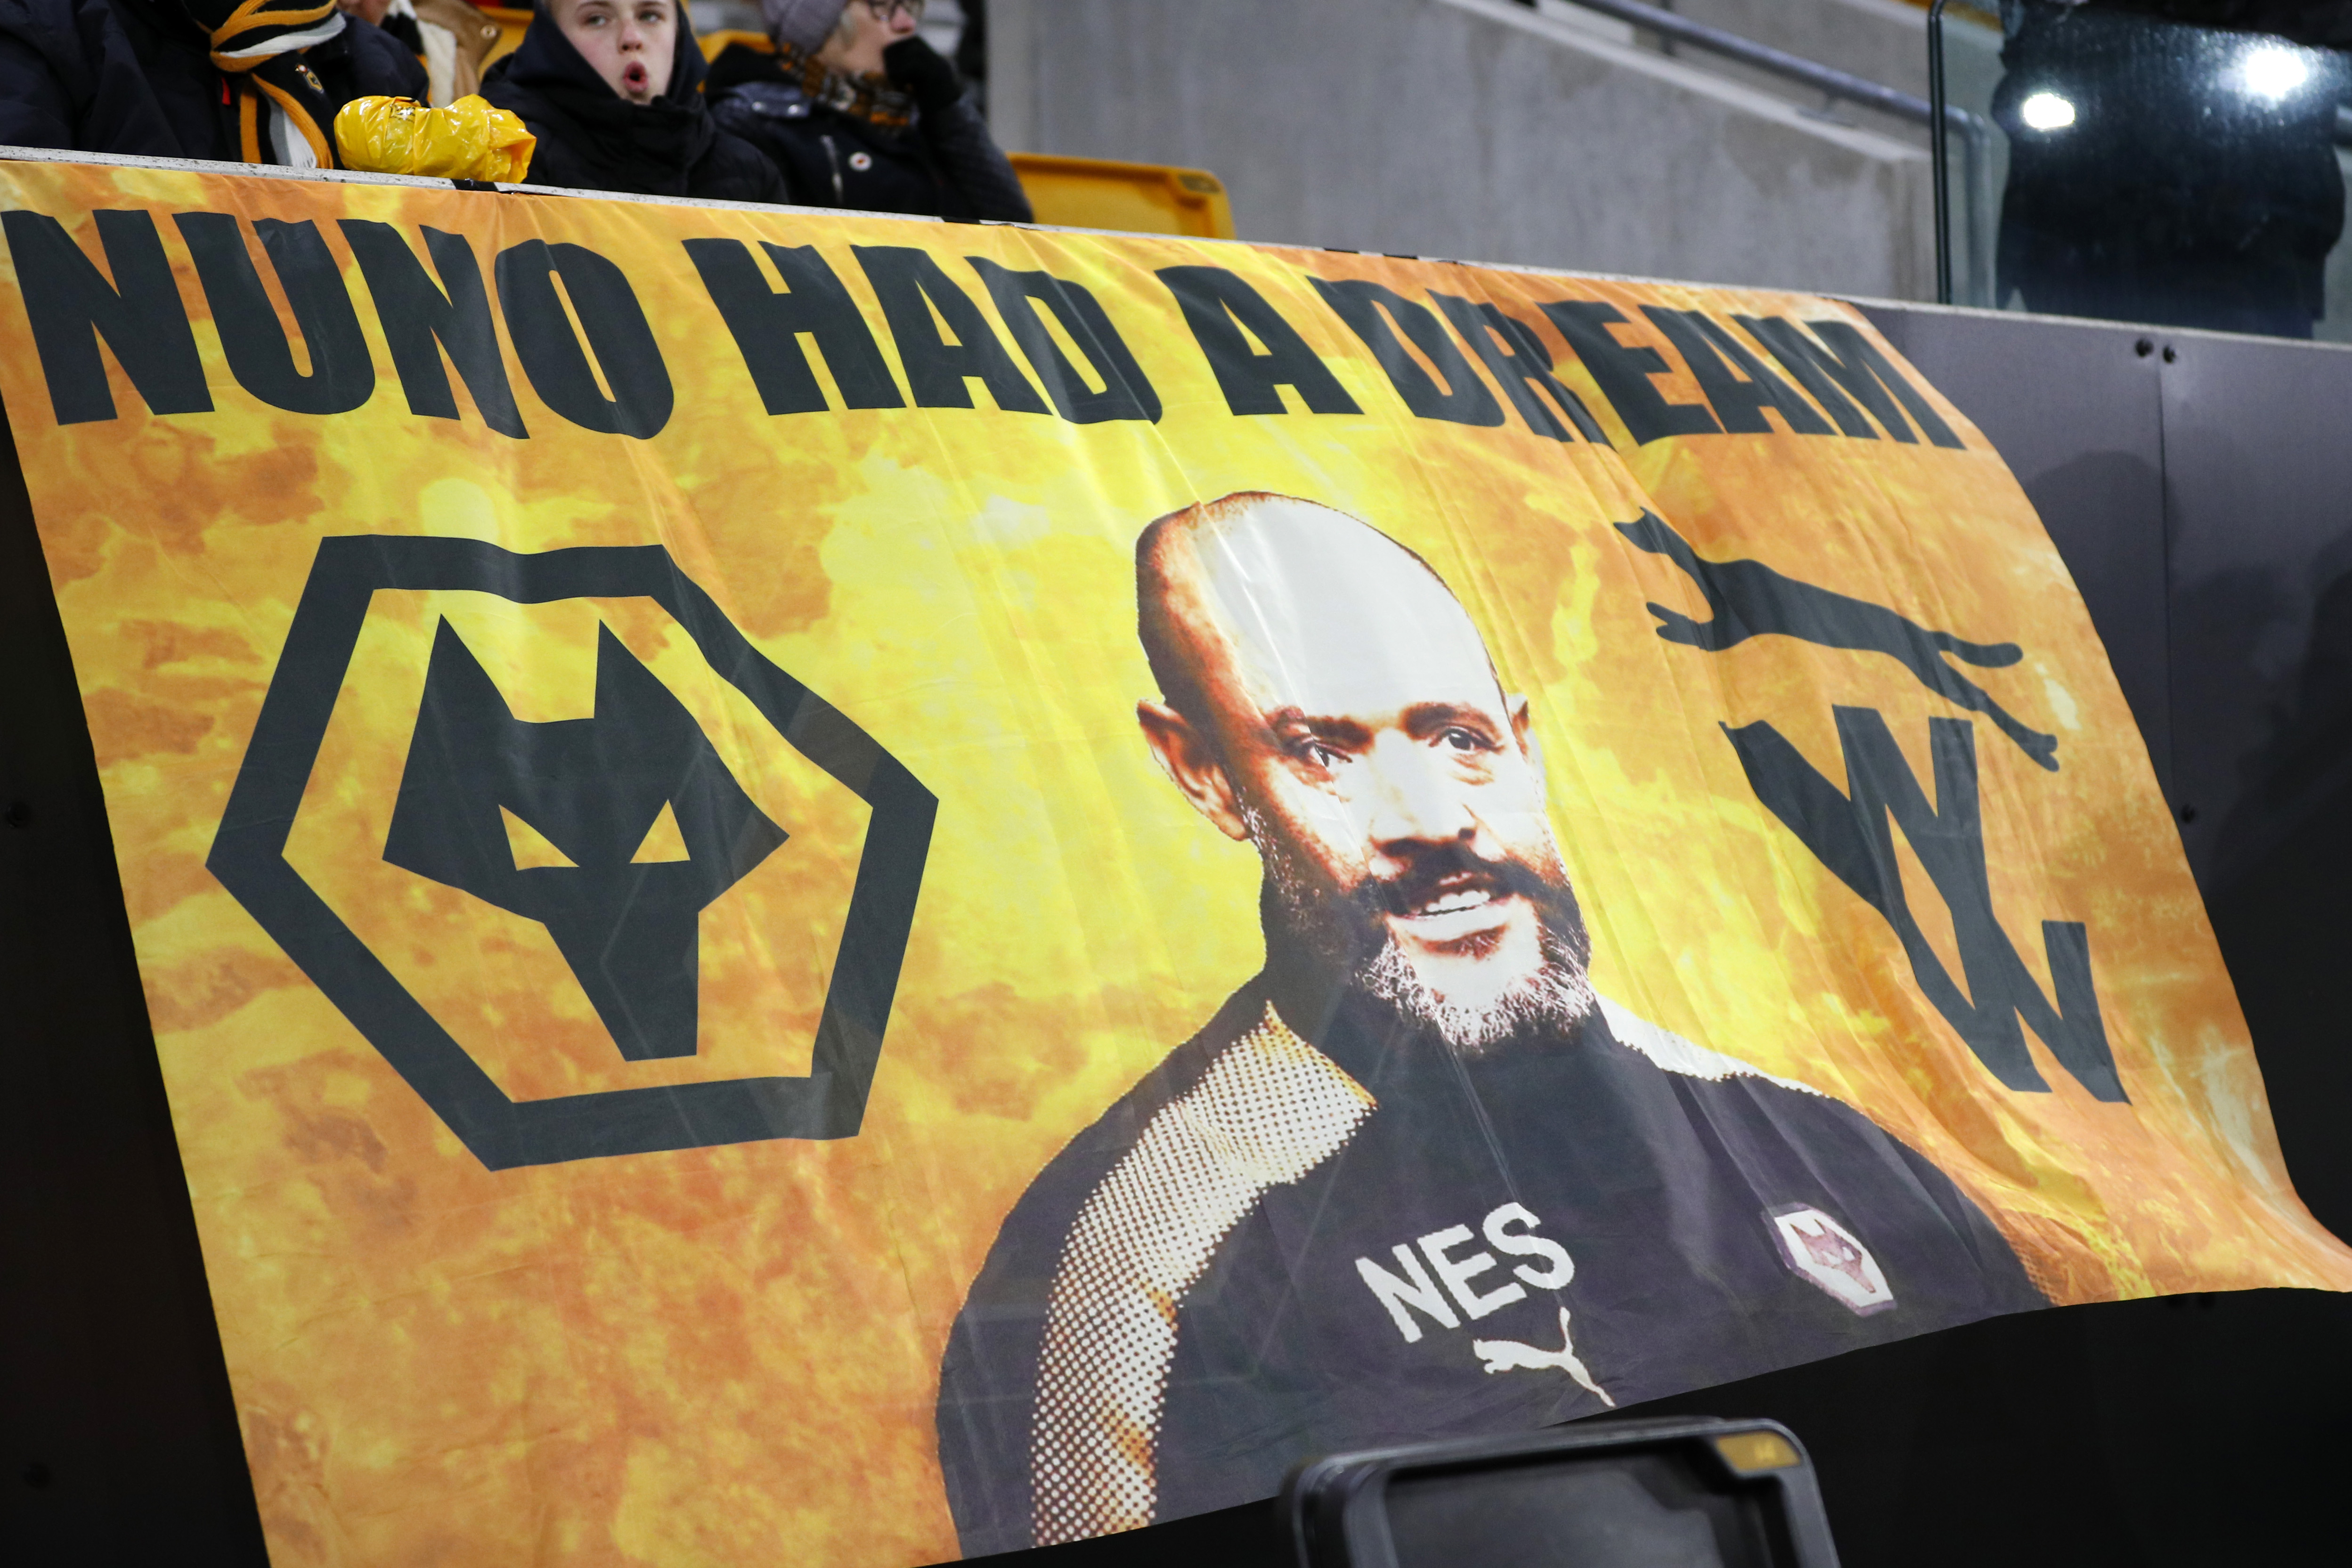 WOLVERHAMPTON, ENGLAND - NOVEMBER 03:  A banner in tribute to Nuno Espirito Santo, Manager of Wolverhampton Wanderers is seen in the stands prior to the Premier League match between Wolverhampton Wanderers and Tottenham Hotspur at Molineux on November 3, 2018 in Wolverhampton, United Kingdom.  (Photo by Lynne Cameron/Getty Images)